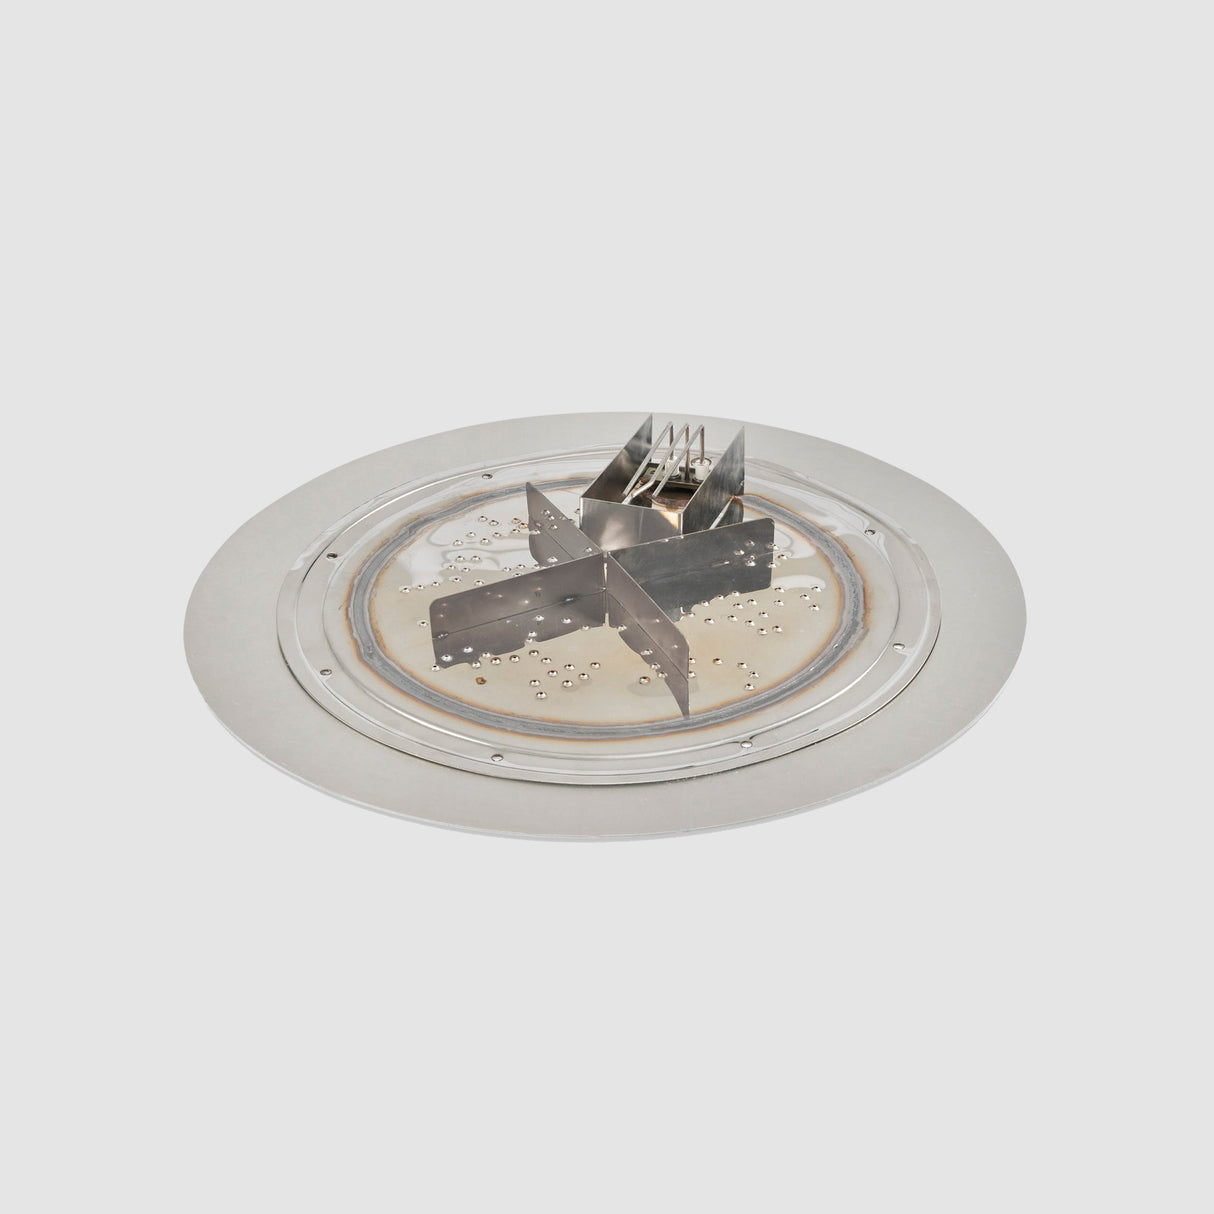 The 20" Crystal Fire Plus Round Gas Burner Insert and Plate Kit with a Direct Spark Ignition on a grey background